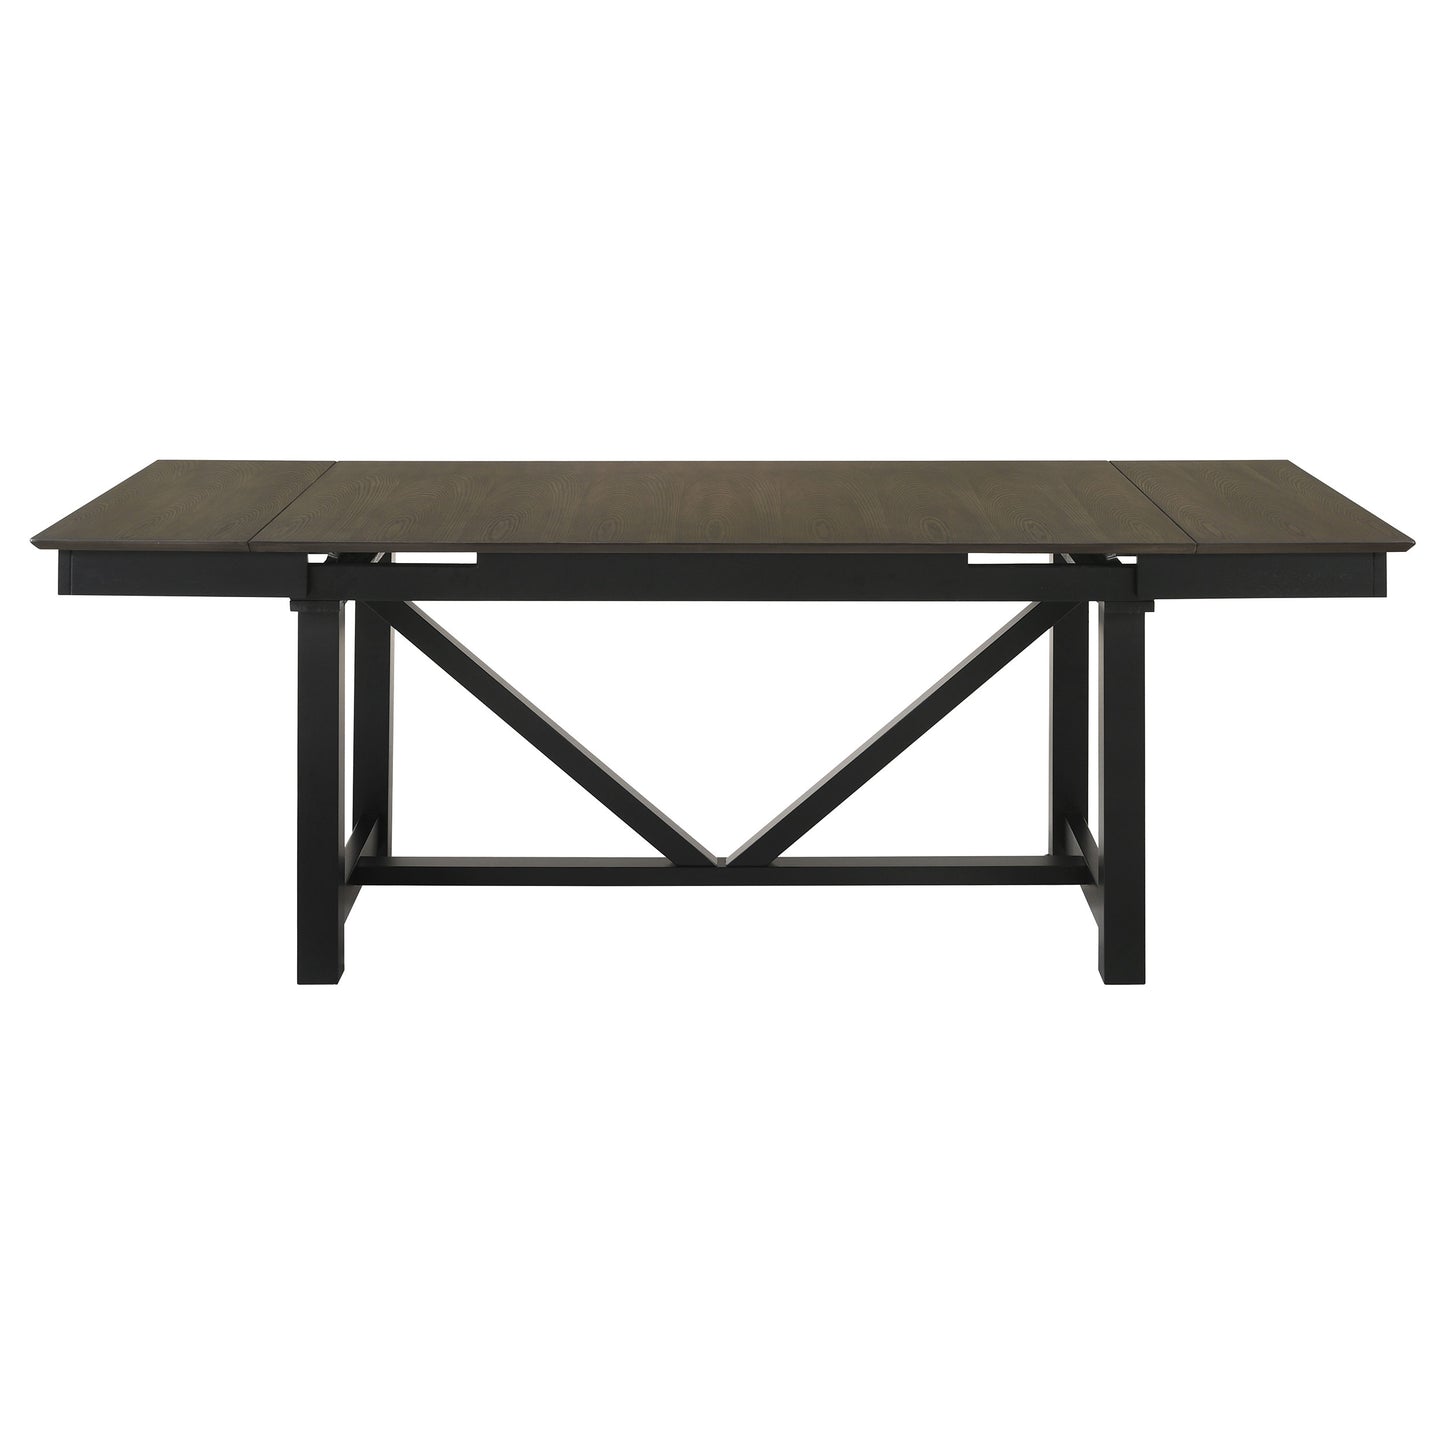 Malia Rectangular Dining Table with Refractory Extension Leaf Black